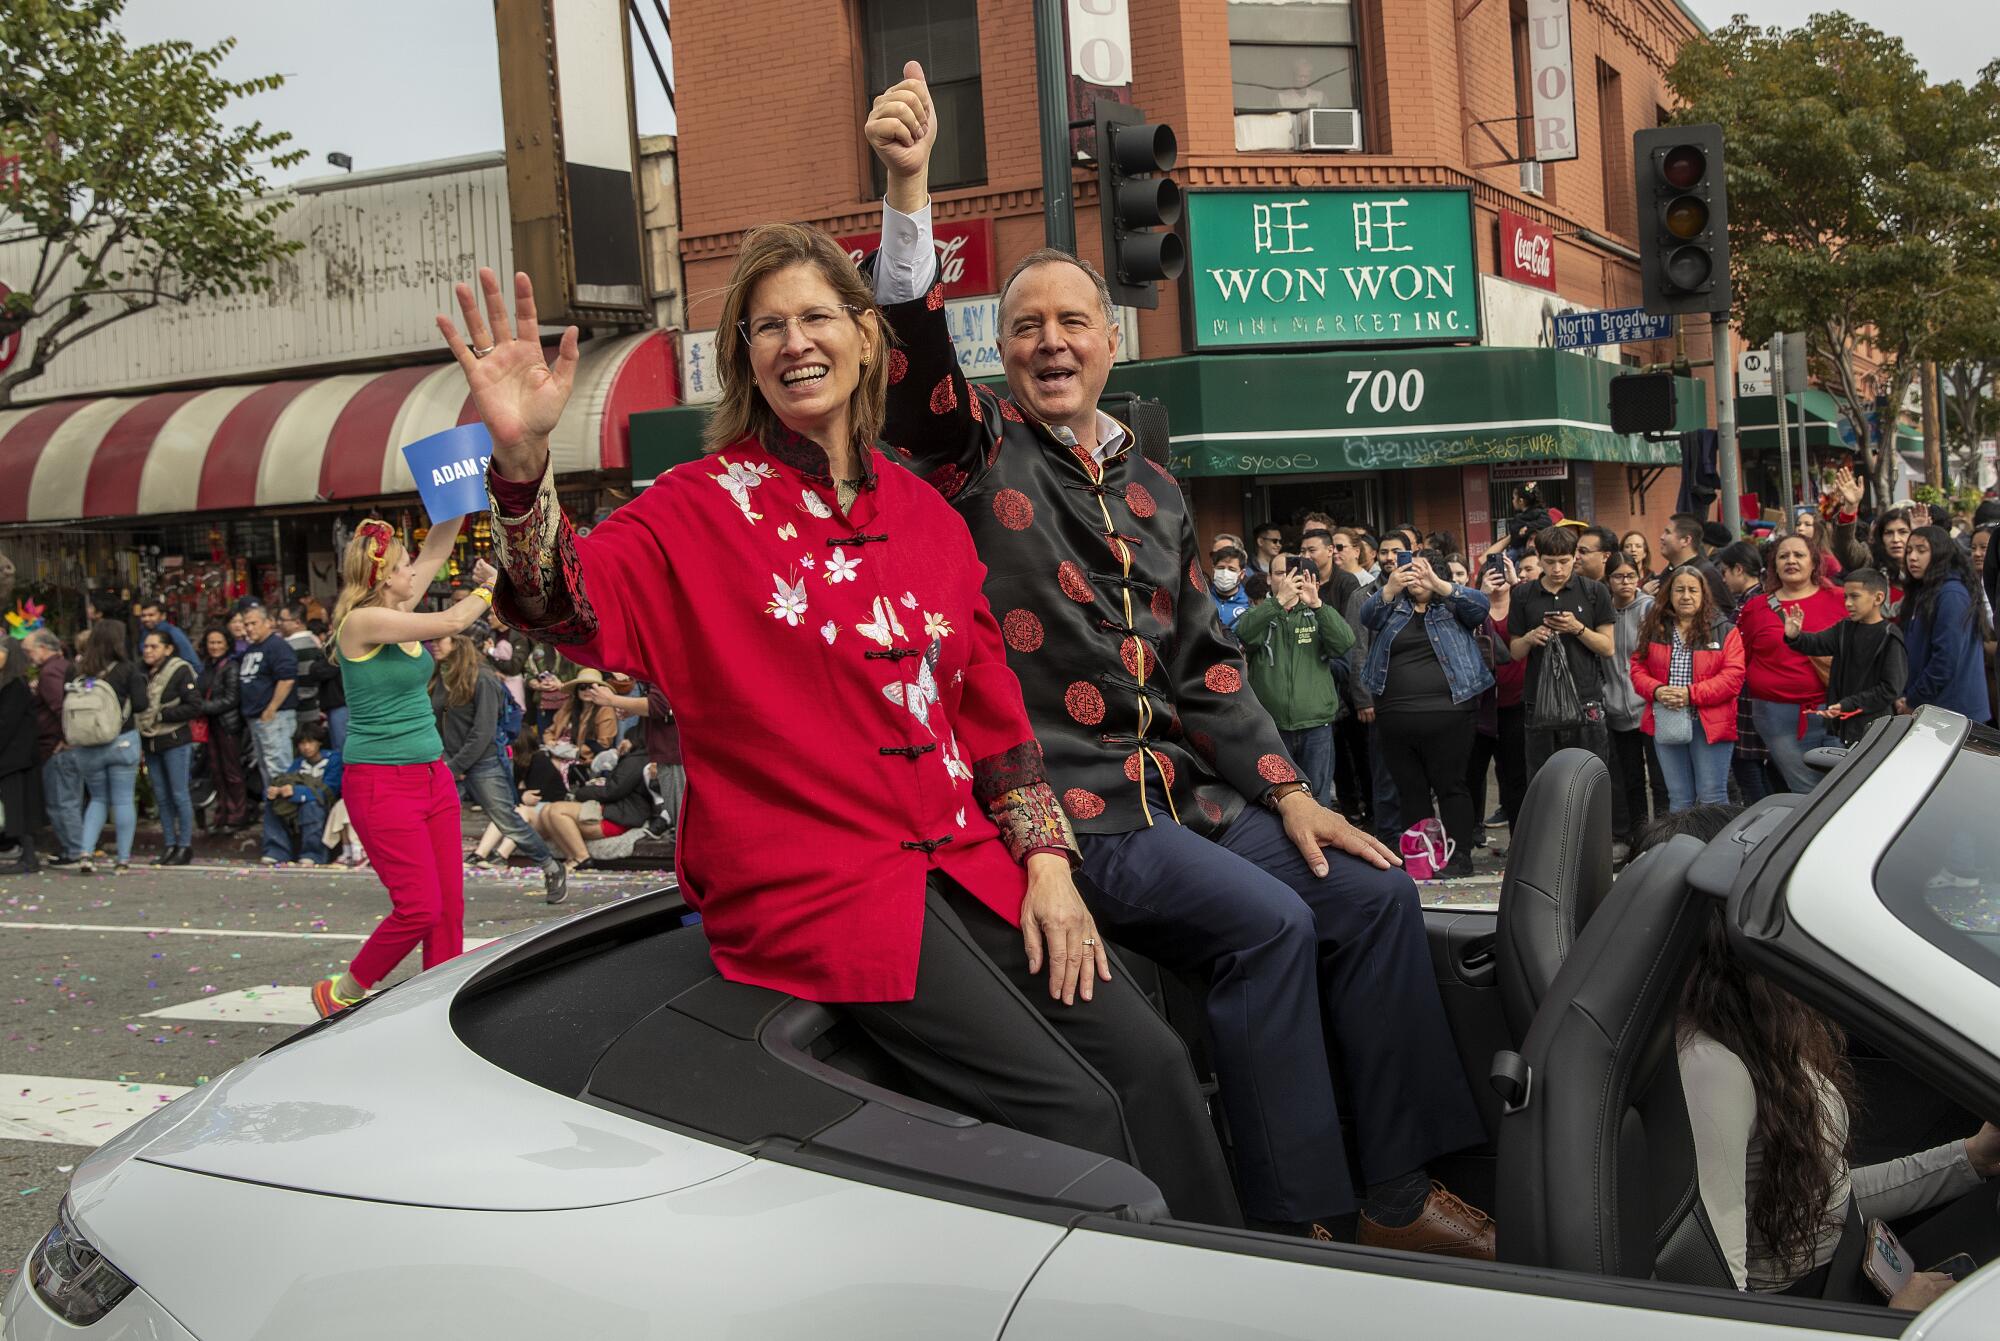 Adam Schiff and wife Eve, in traditional Chinese garments, wave from a convertible as a crowd lines the street behind them